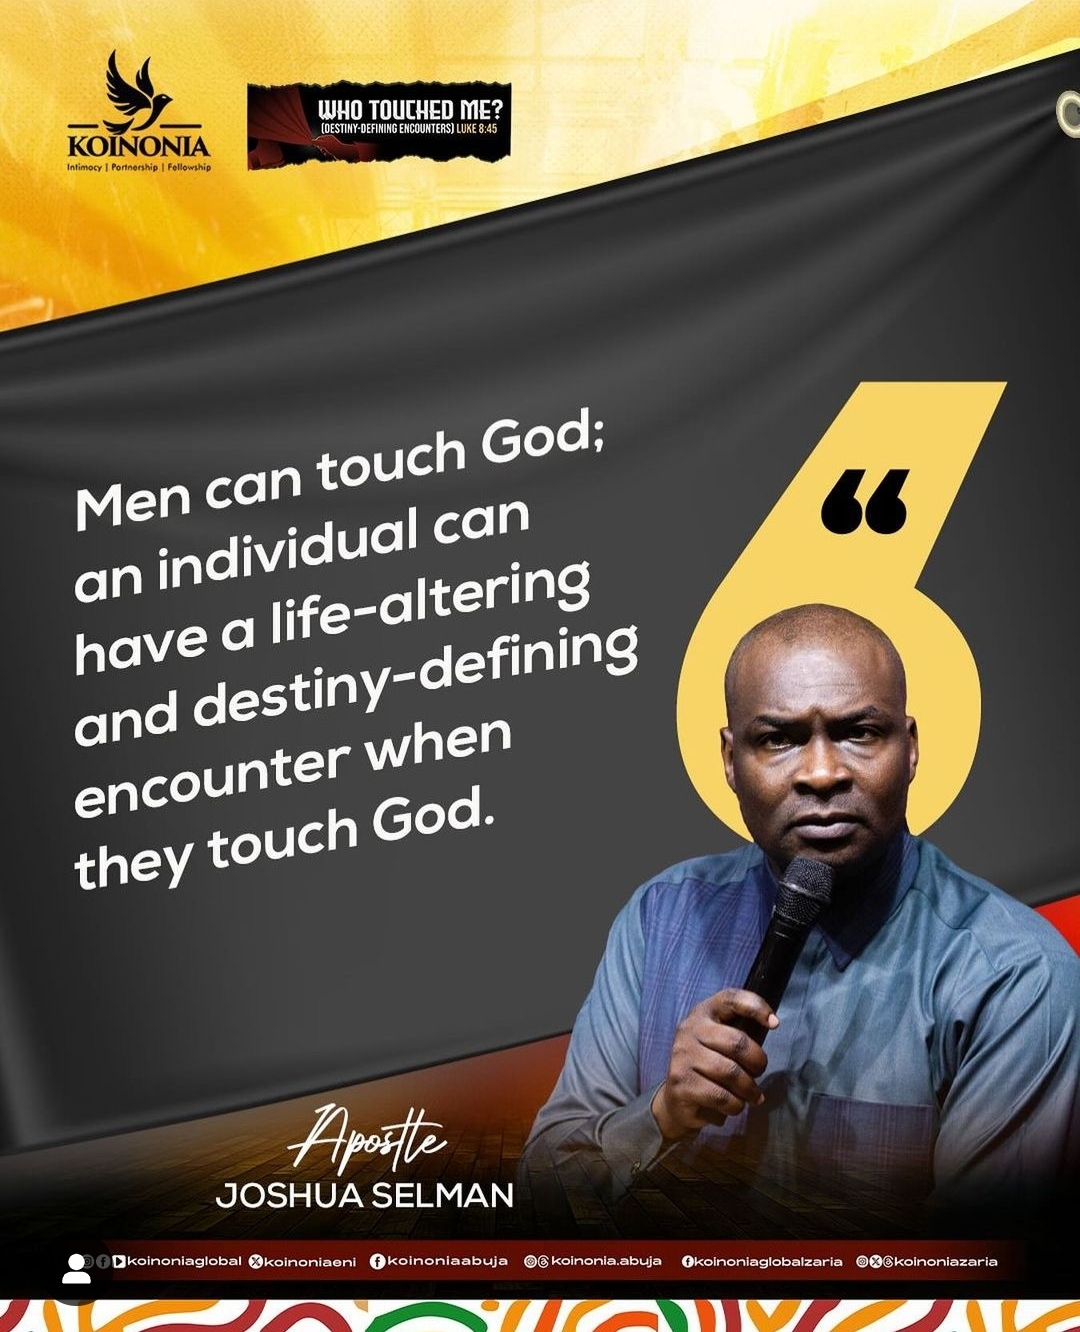 DOWNLOAD MP3: WHO TOUCHED ME? (DESTINY-DEFINING ENCOUNTERS) BY Apostle Joshua Selman 3